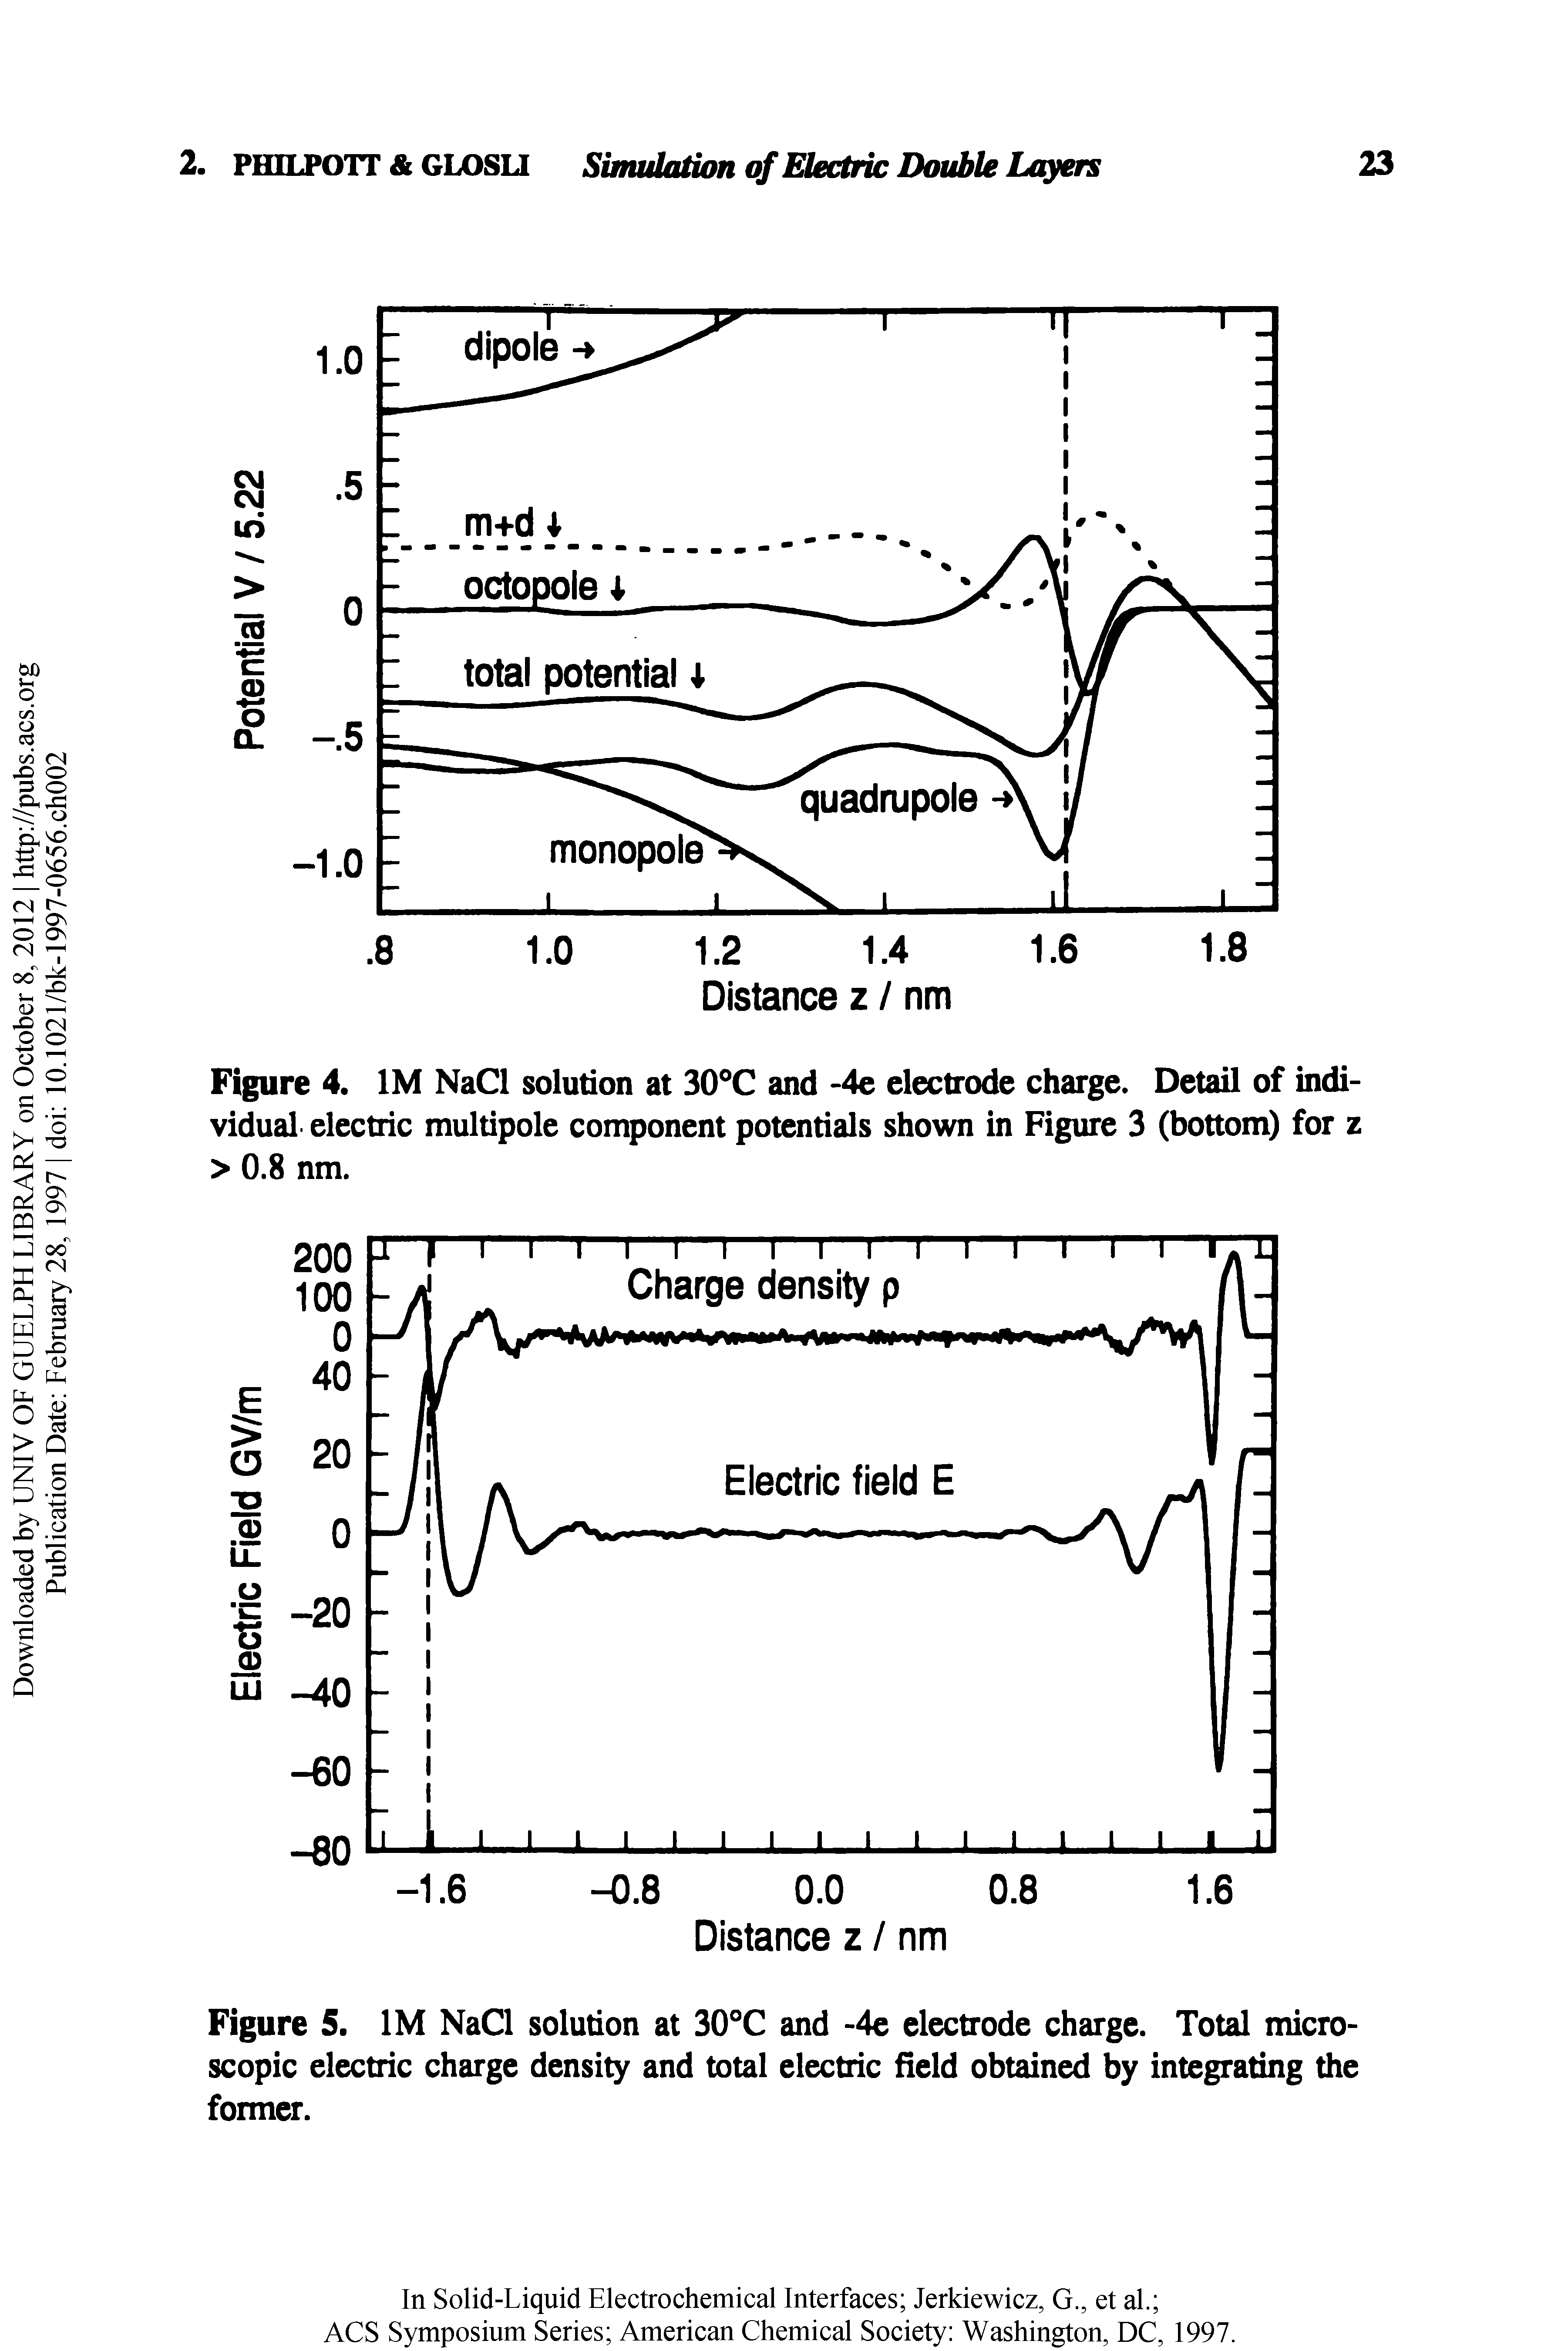 Figure 4. IM NaCl solution at 30°C and -4e electrode charge. Detail of individual electric multipole component potentials shown in Figure 3 (bottom) for z > 0.8 nm.